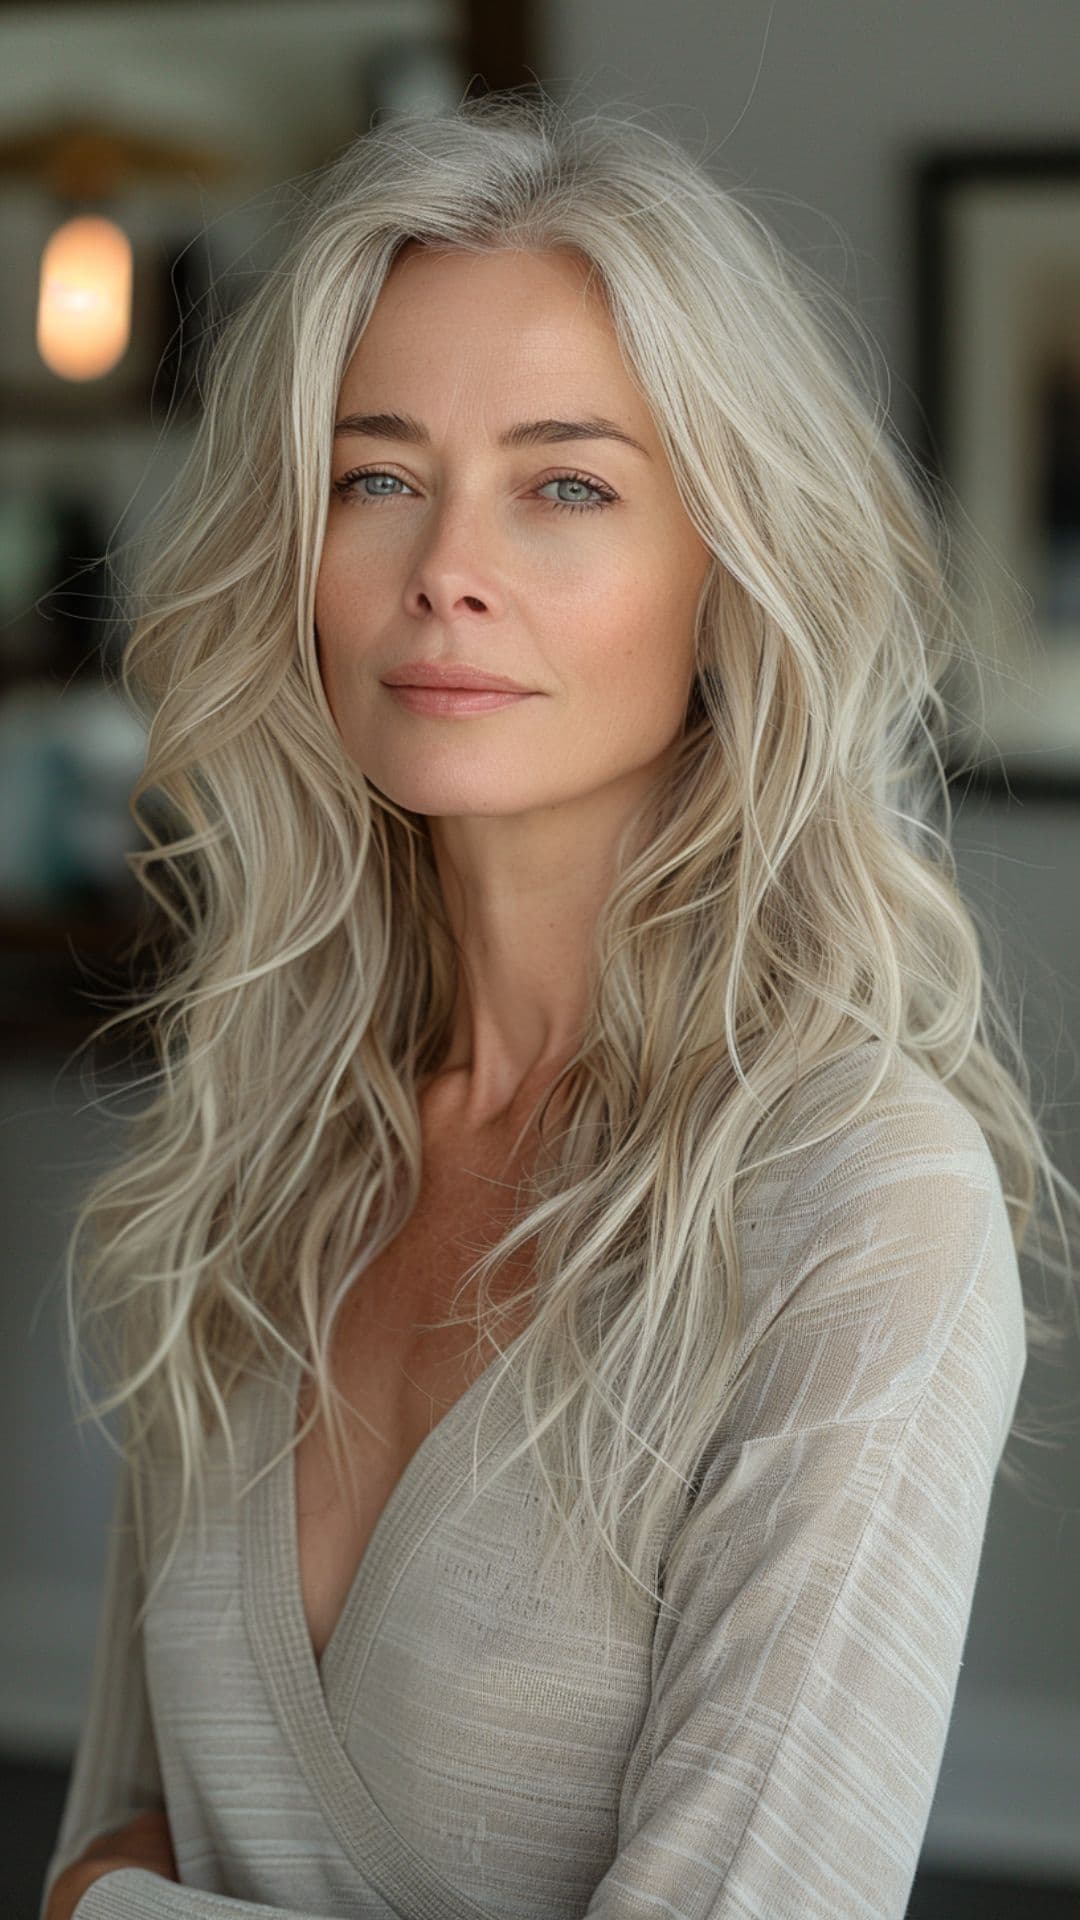 An older woman modelling a subtle waves with middle part hairstyle.